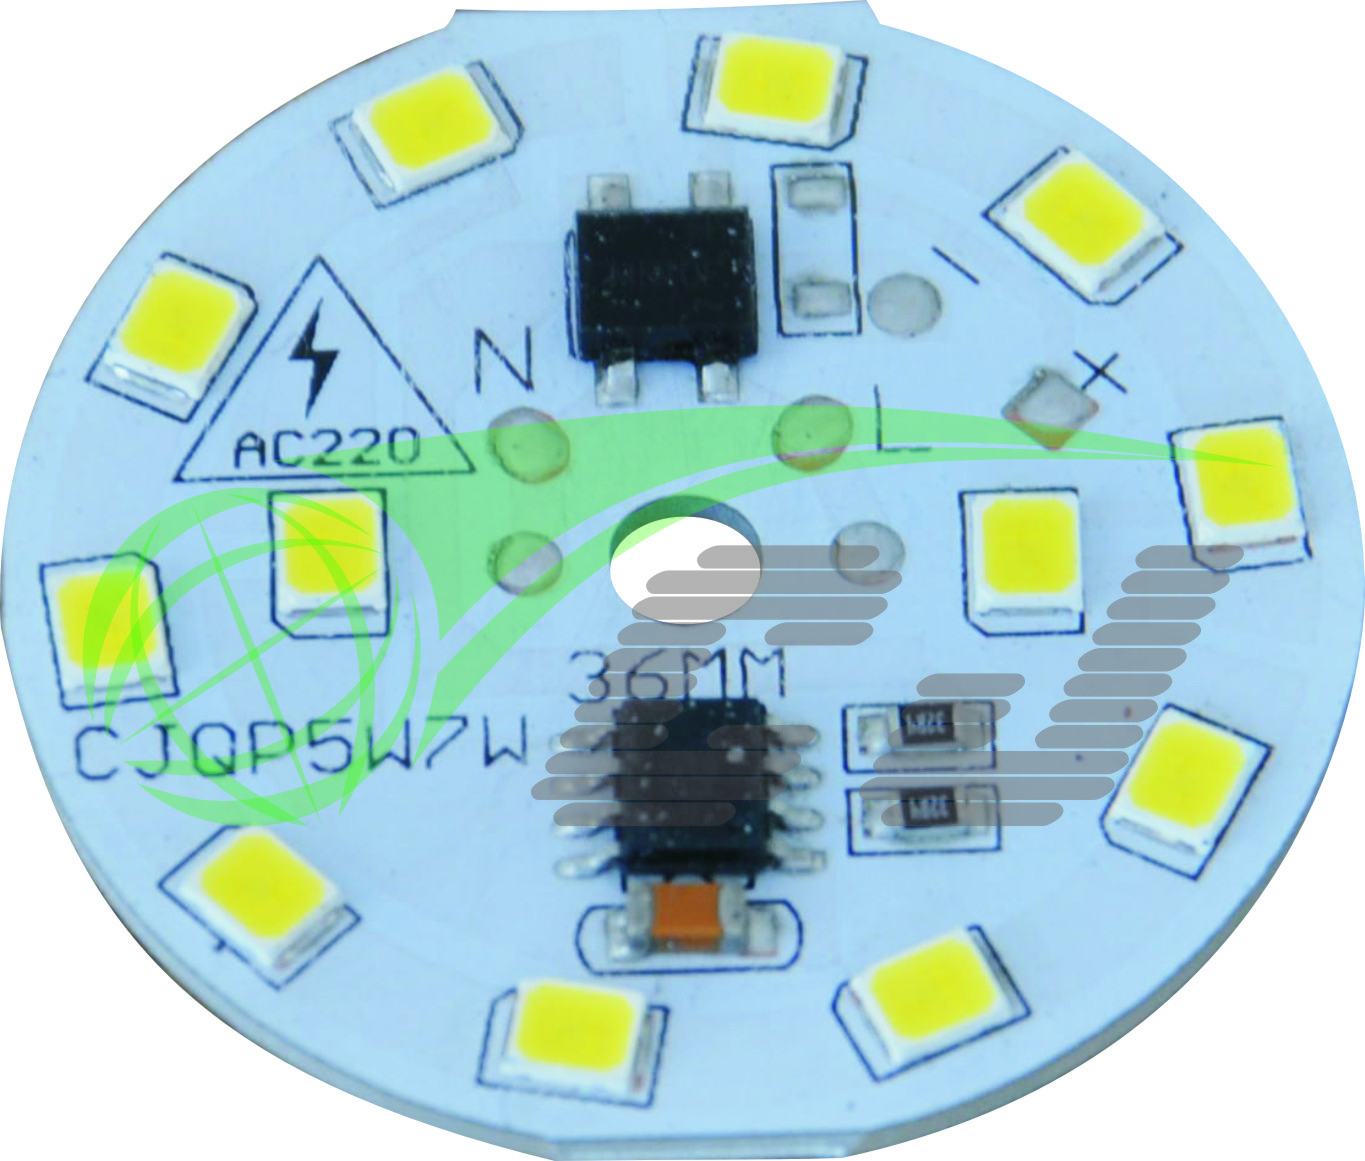 Compact Direct AC line LED module with high PF and low THD performance 7W LED bulb lamp1 step